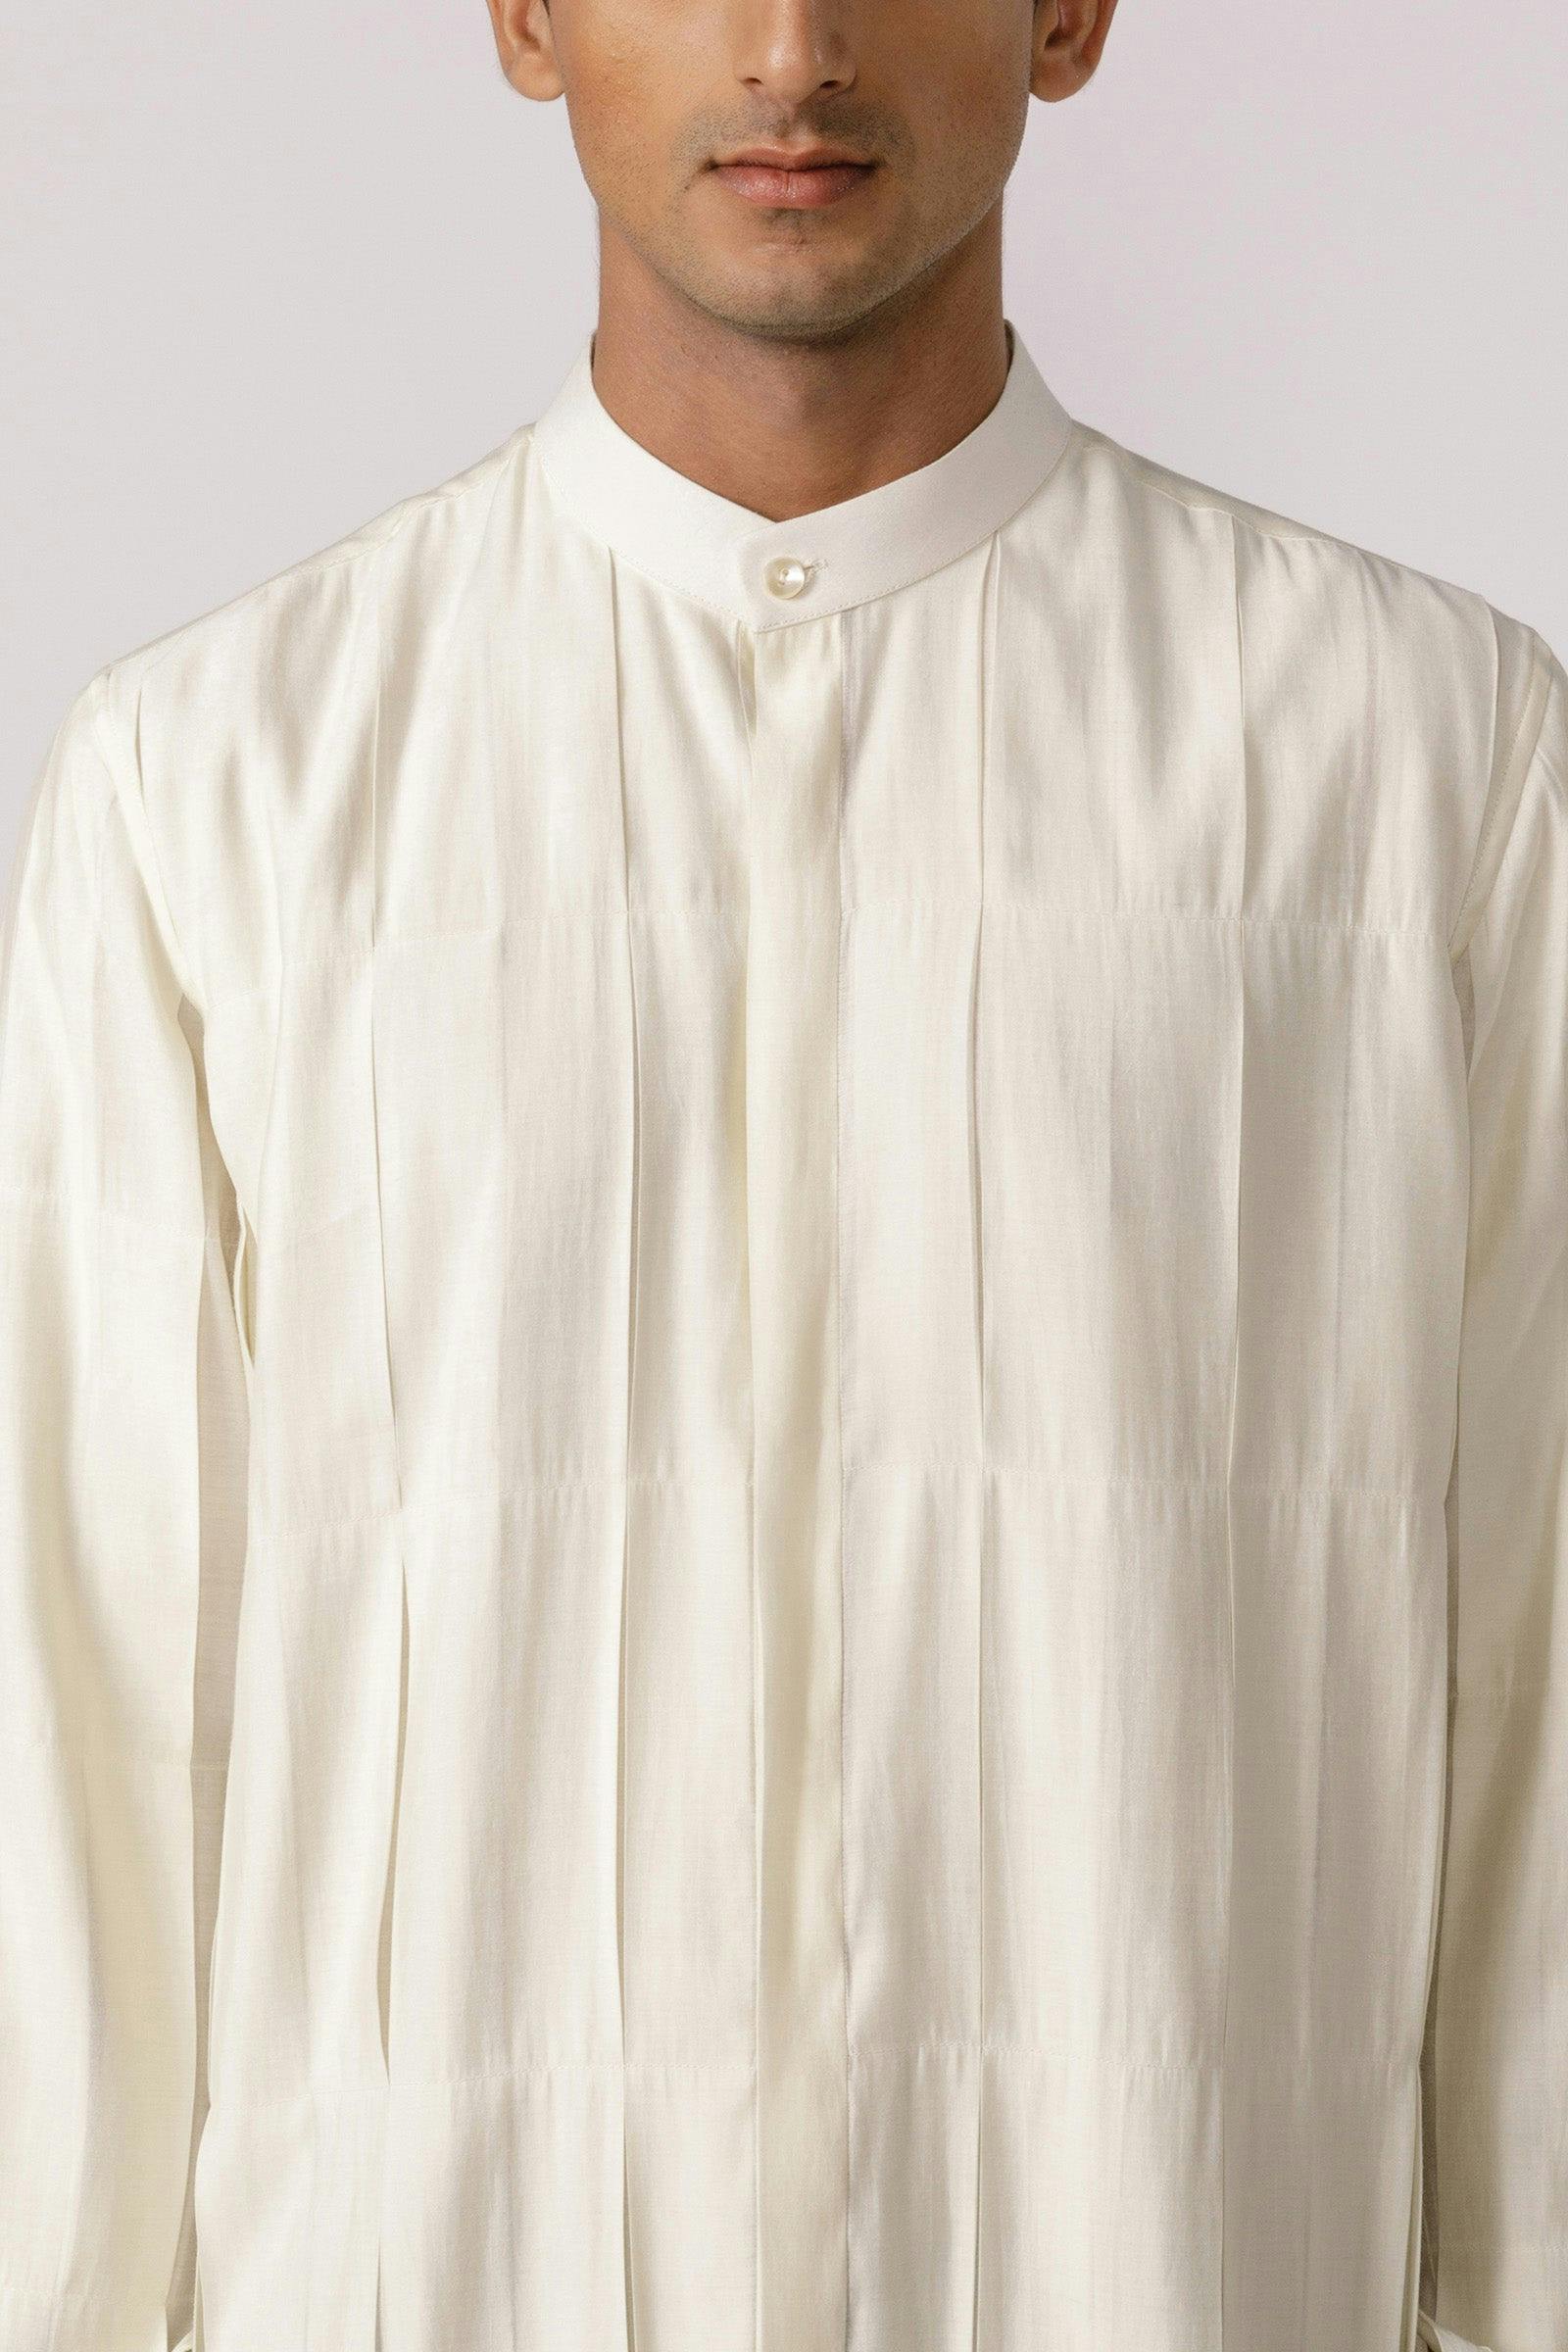 Box pleated mandarin collar shirt, a product by Line Outline